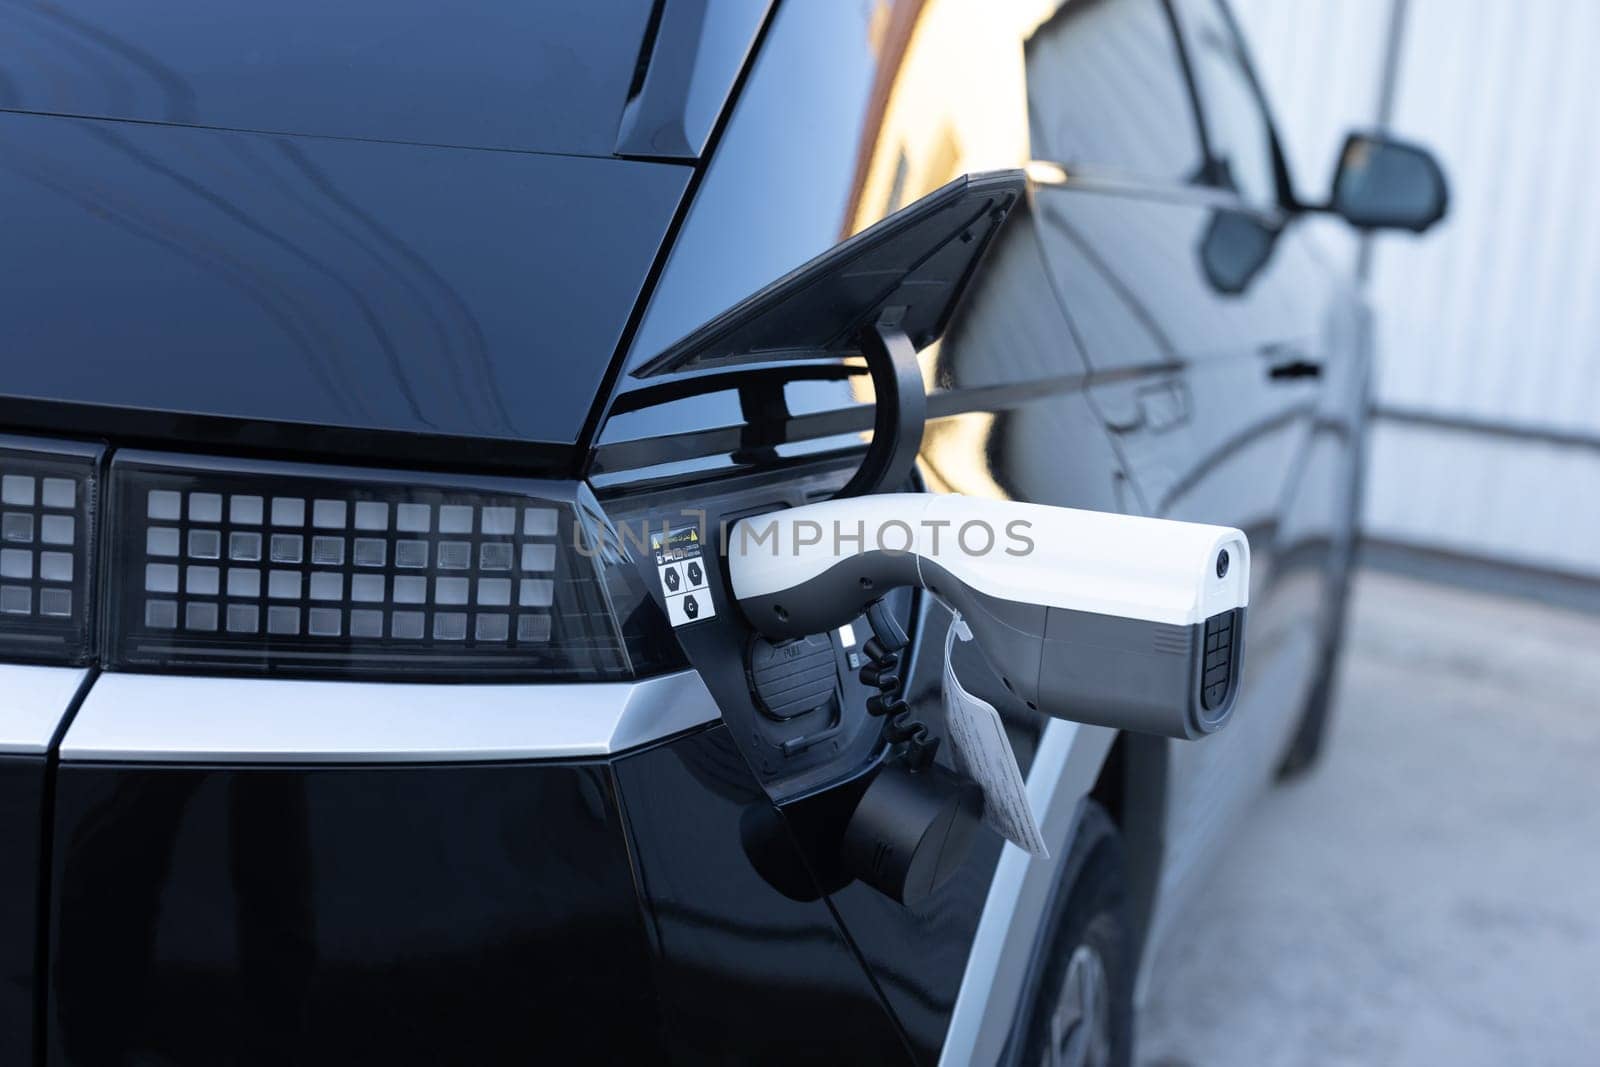 V2L VTOL device that allows to connect various electrical devices to the battery of an electric vehicle and use its energy. V2L charger opens new perspectives for the use of electric vehicle energy by uflypro